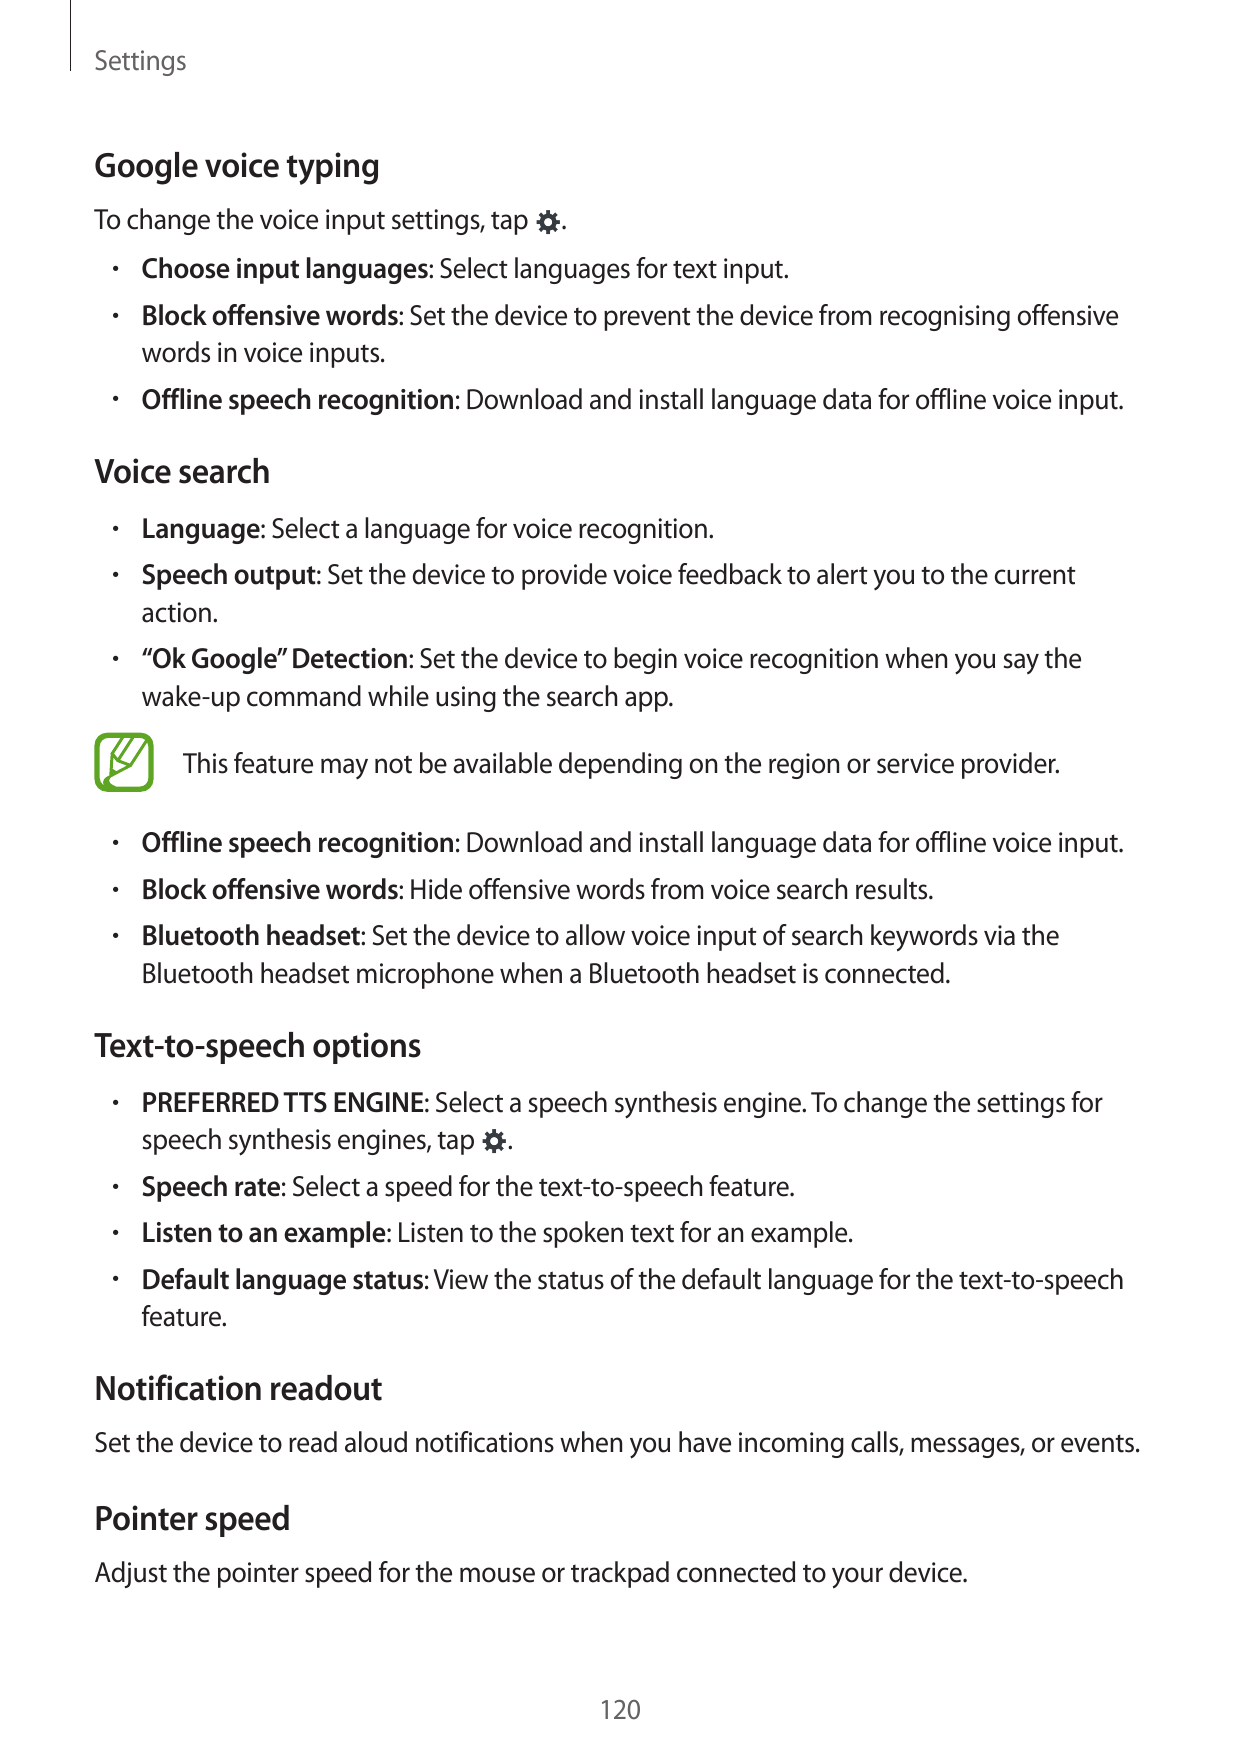 SettingsGoogle voice typingTo change the voice input settings, tap.• Choose input languages: Select languages for text input.• B